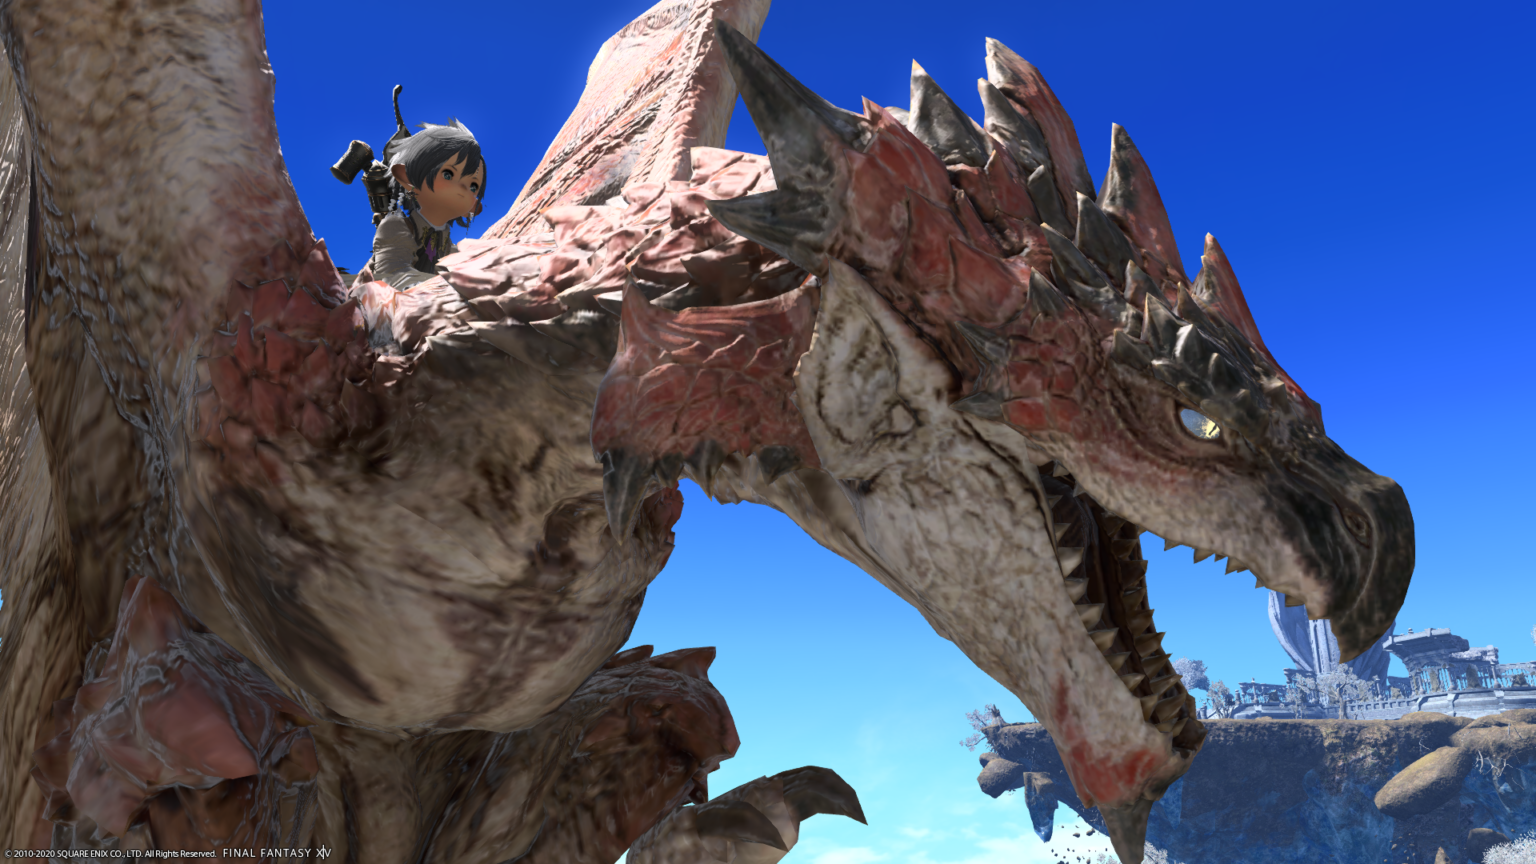 Gallery of Ff14 Spore Mount.